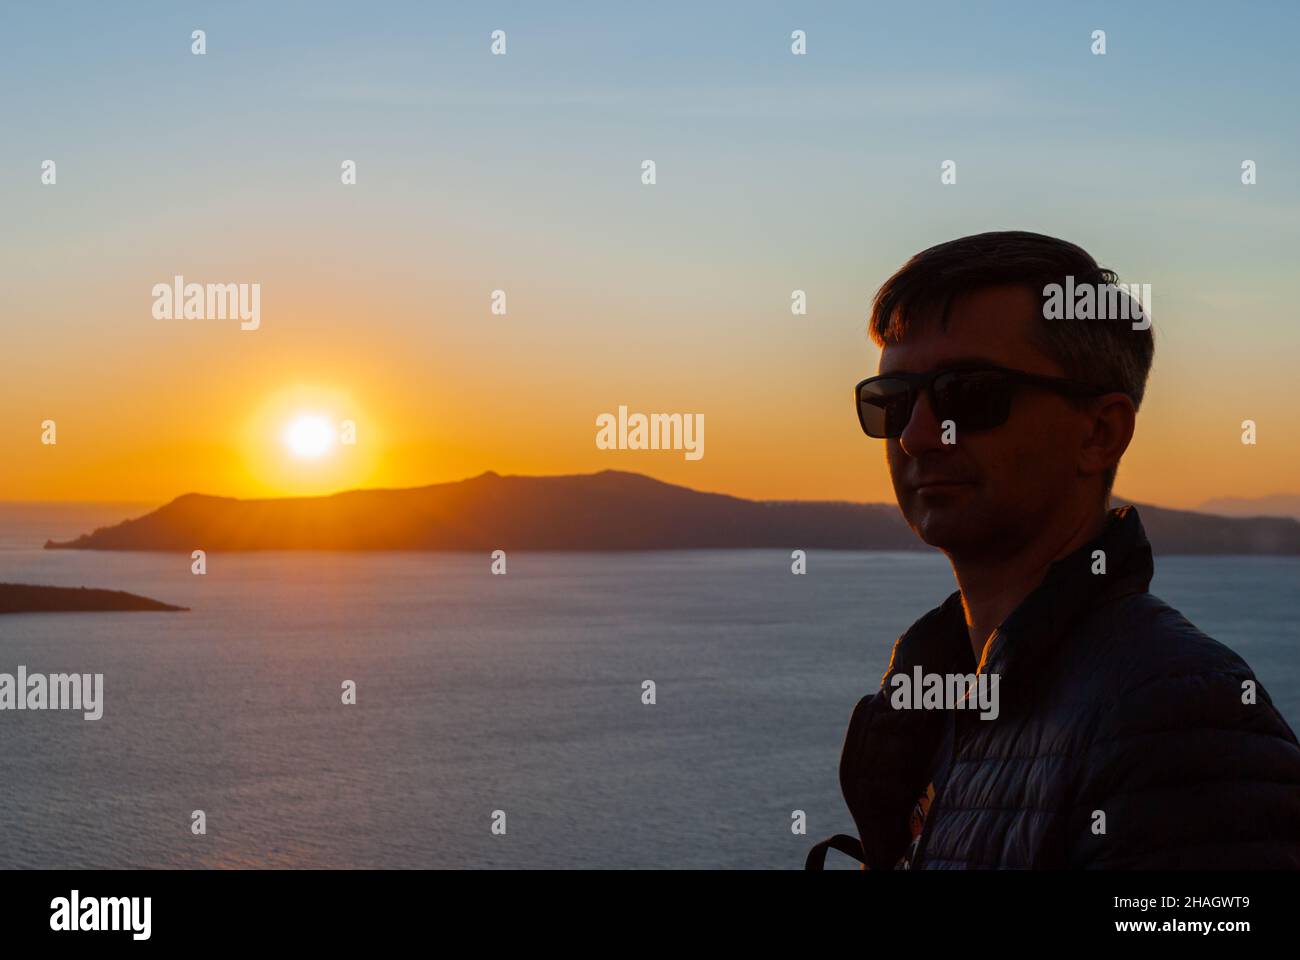 Silhouette of a man's head and shoulders in the background of a sunset in Santorini, Greece Stock Photo